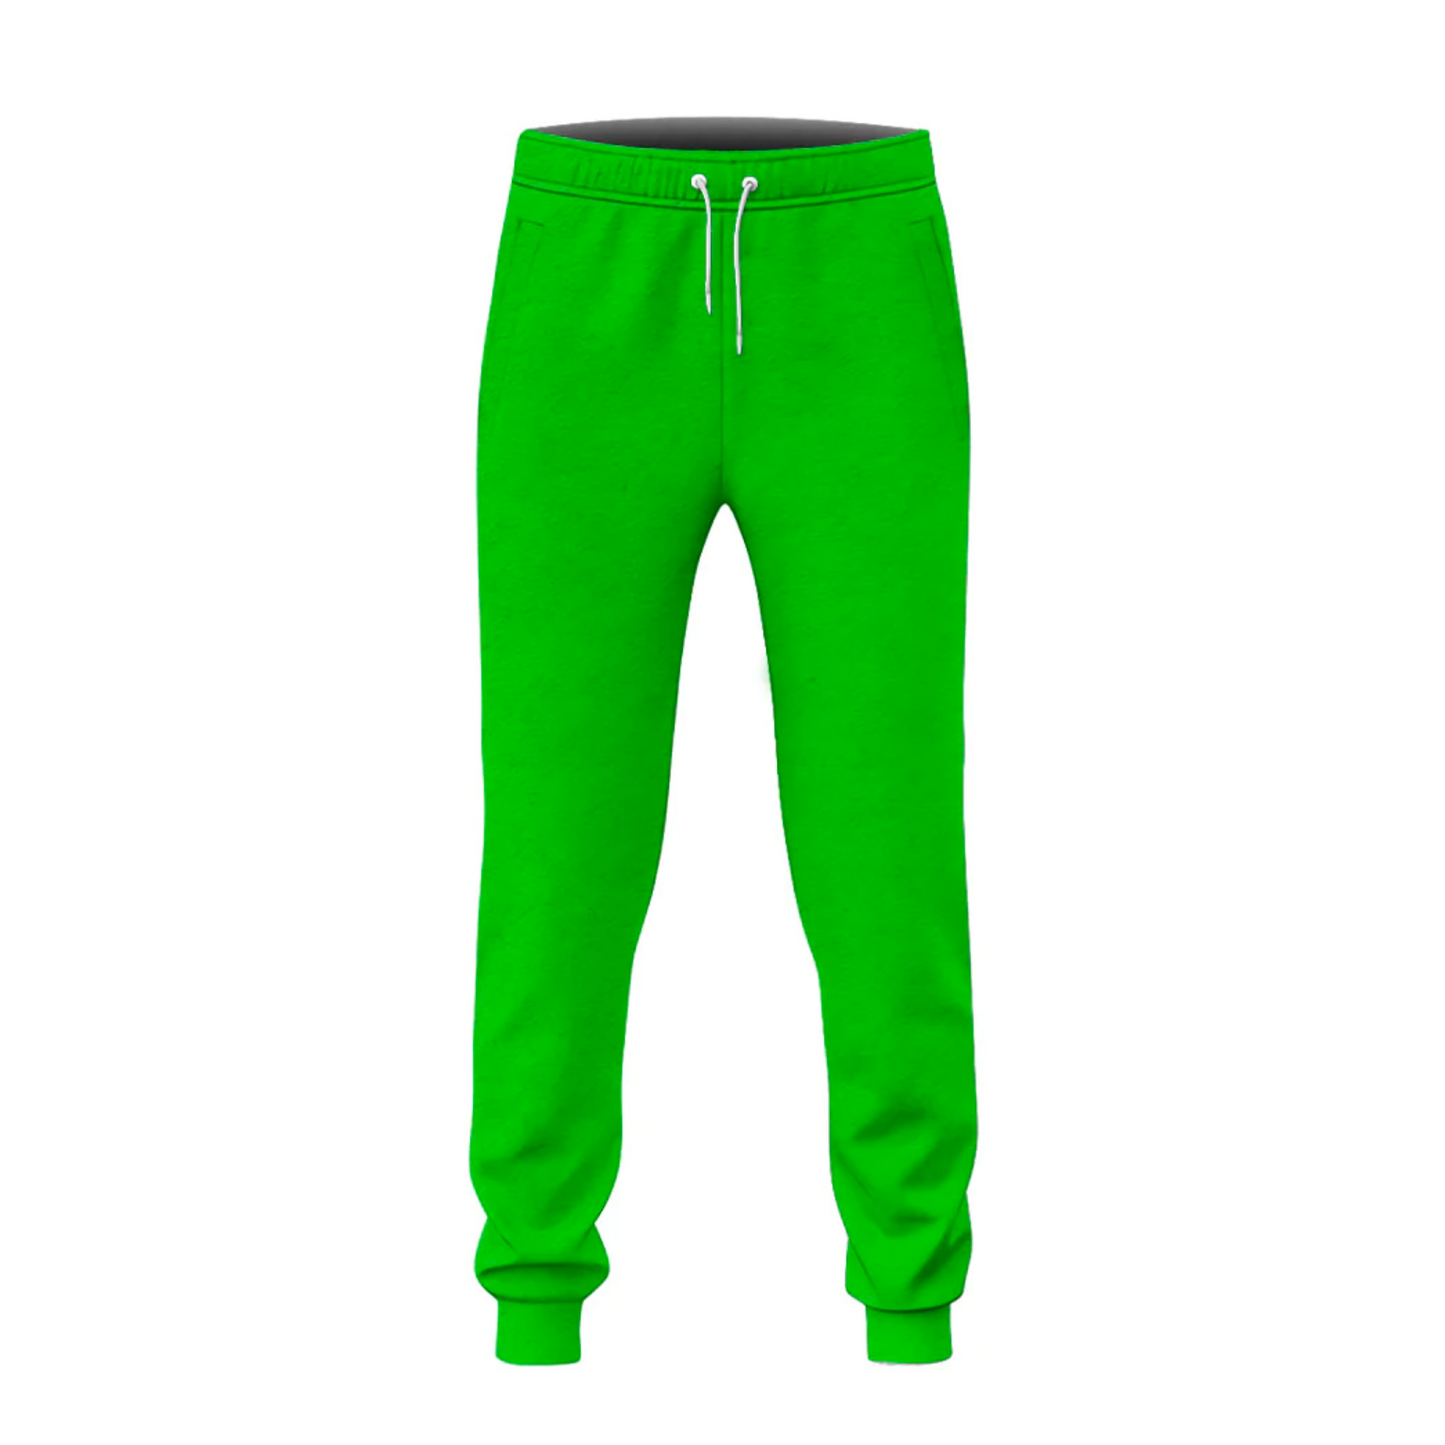 Super Mario Costume Pants Game Character Yoshi Costume Jogger Green White Unisex Adults